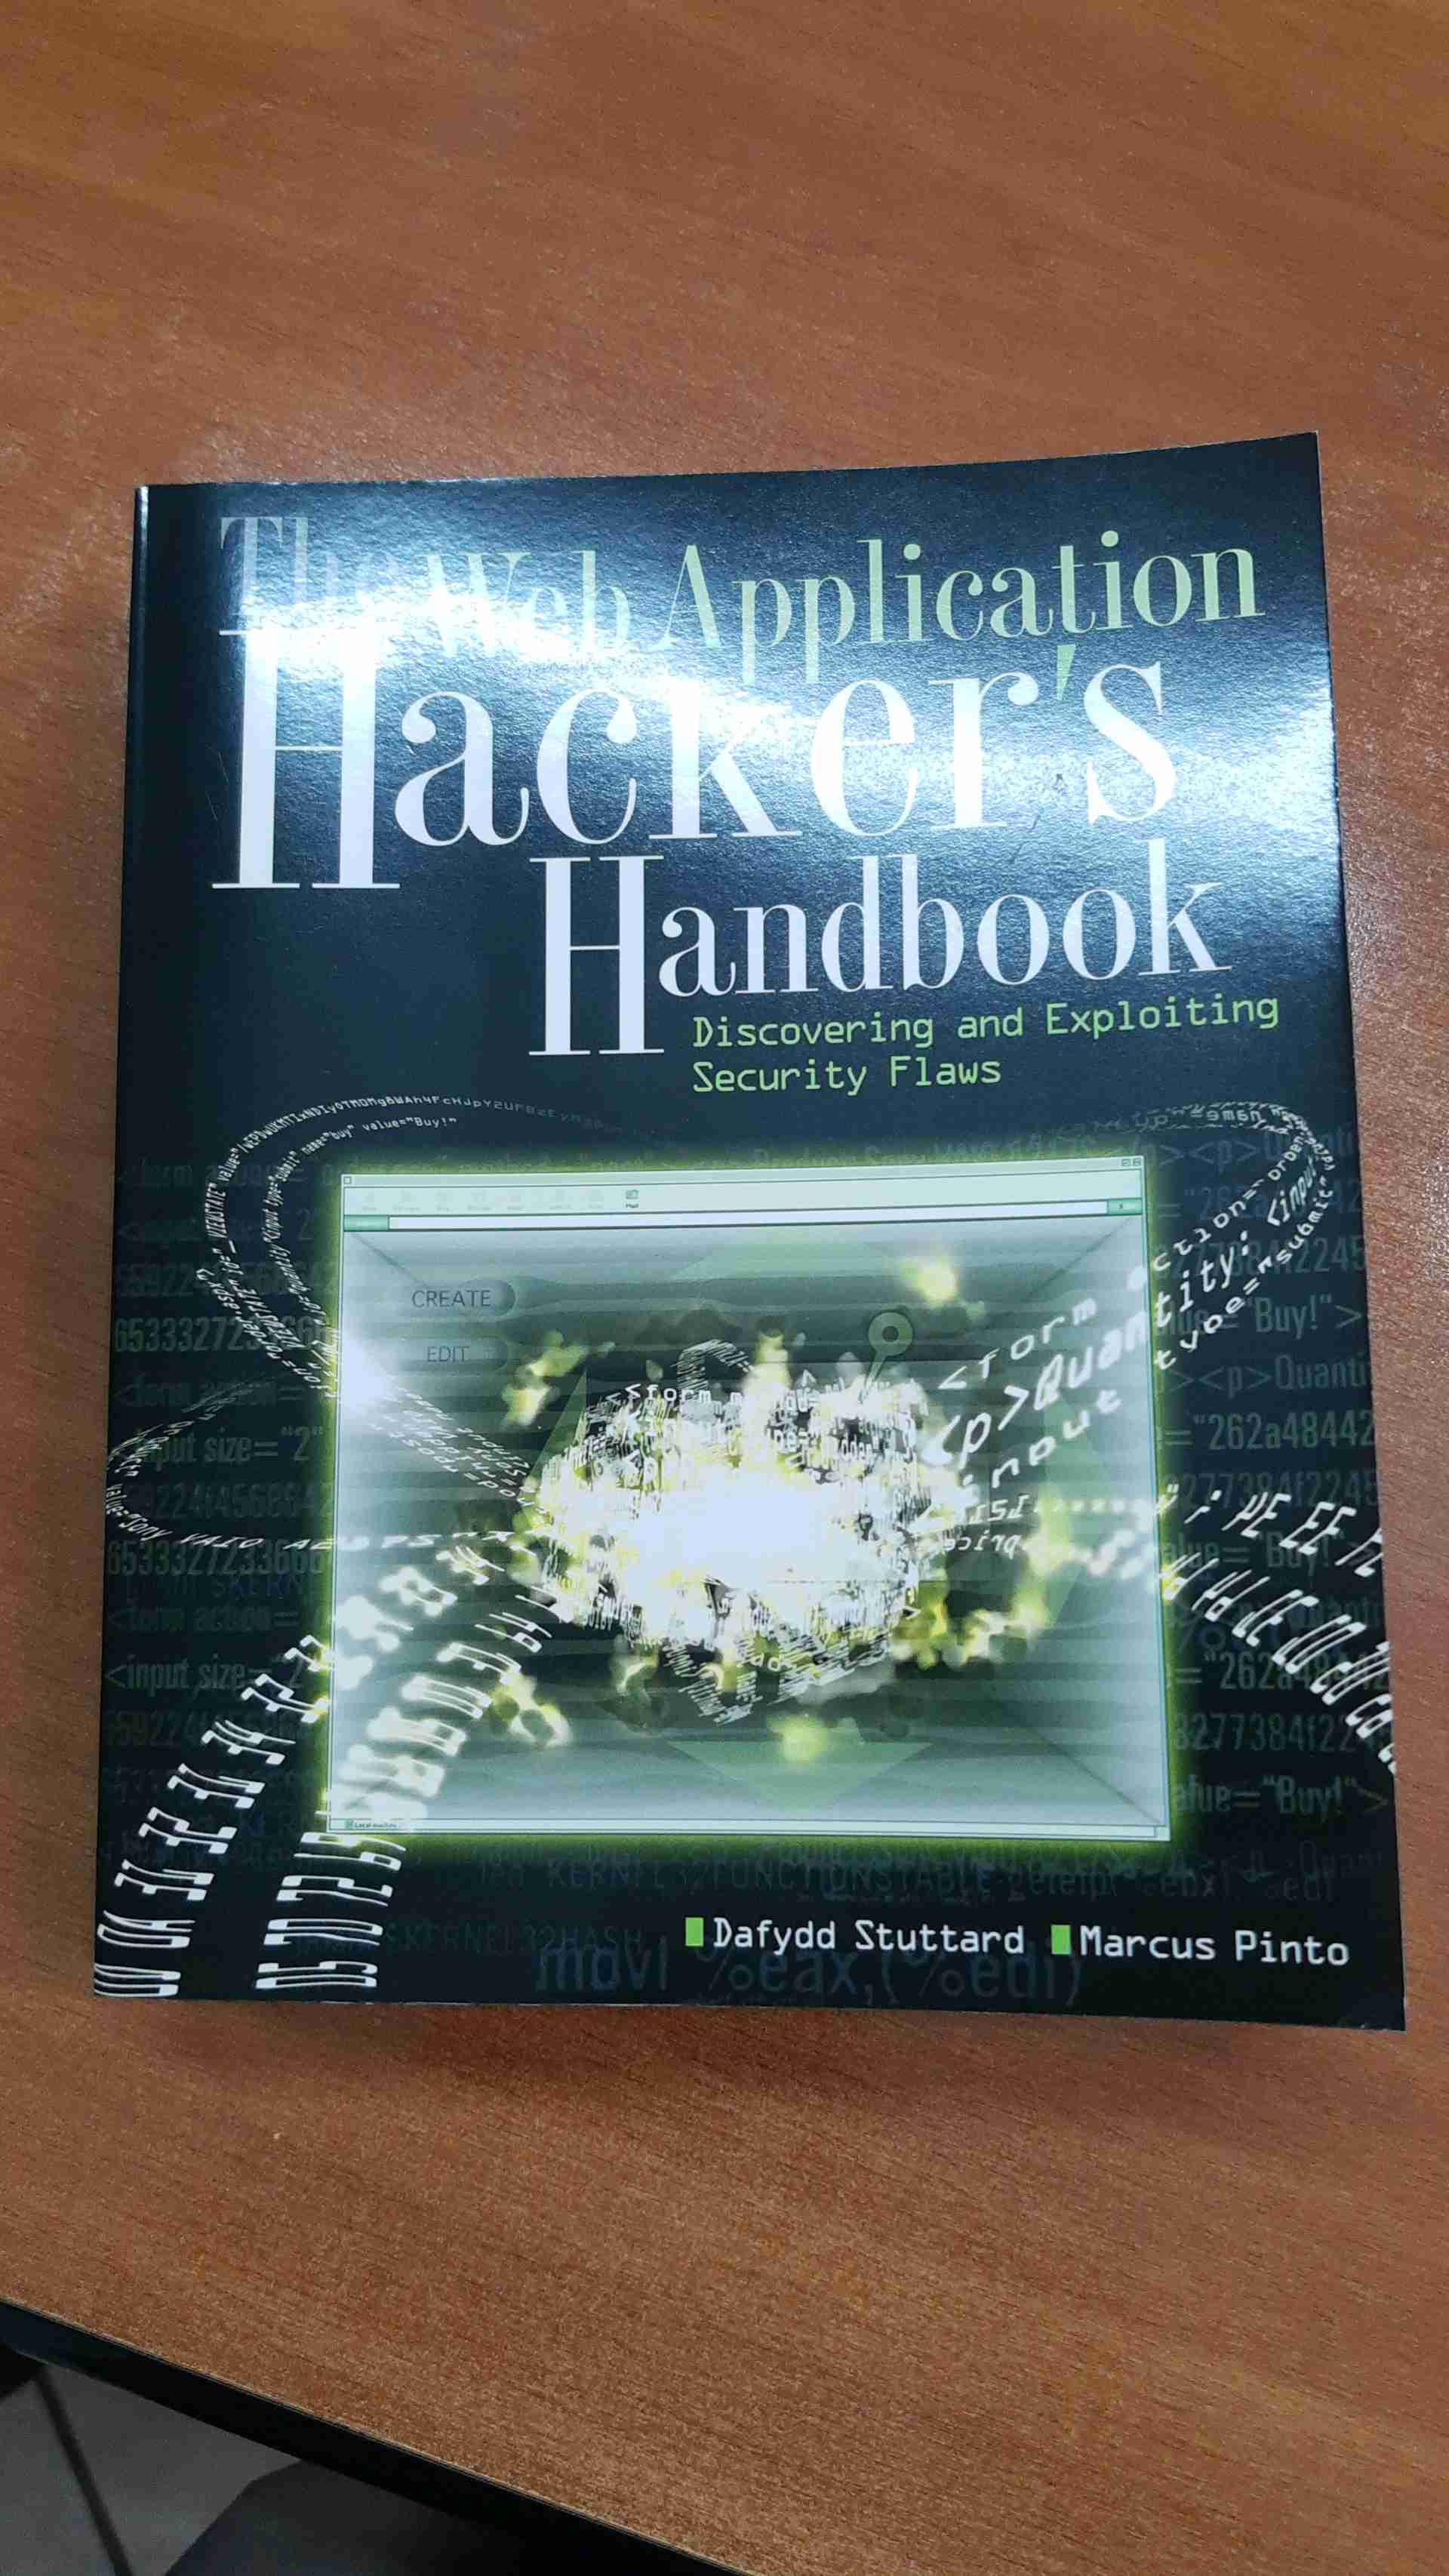 The Web Application Hacker's Handbook: Discovering and Exploiting Security Flaws libro usato